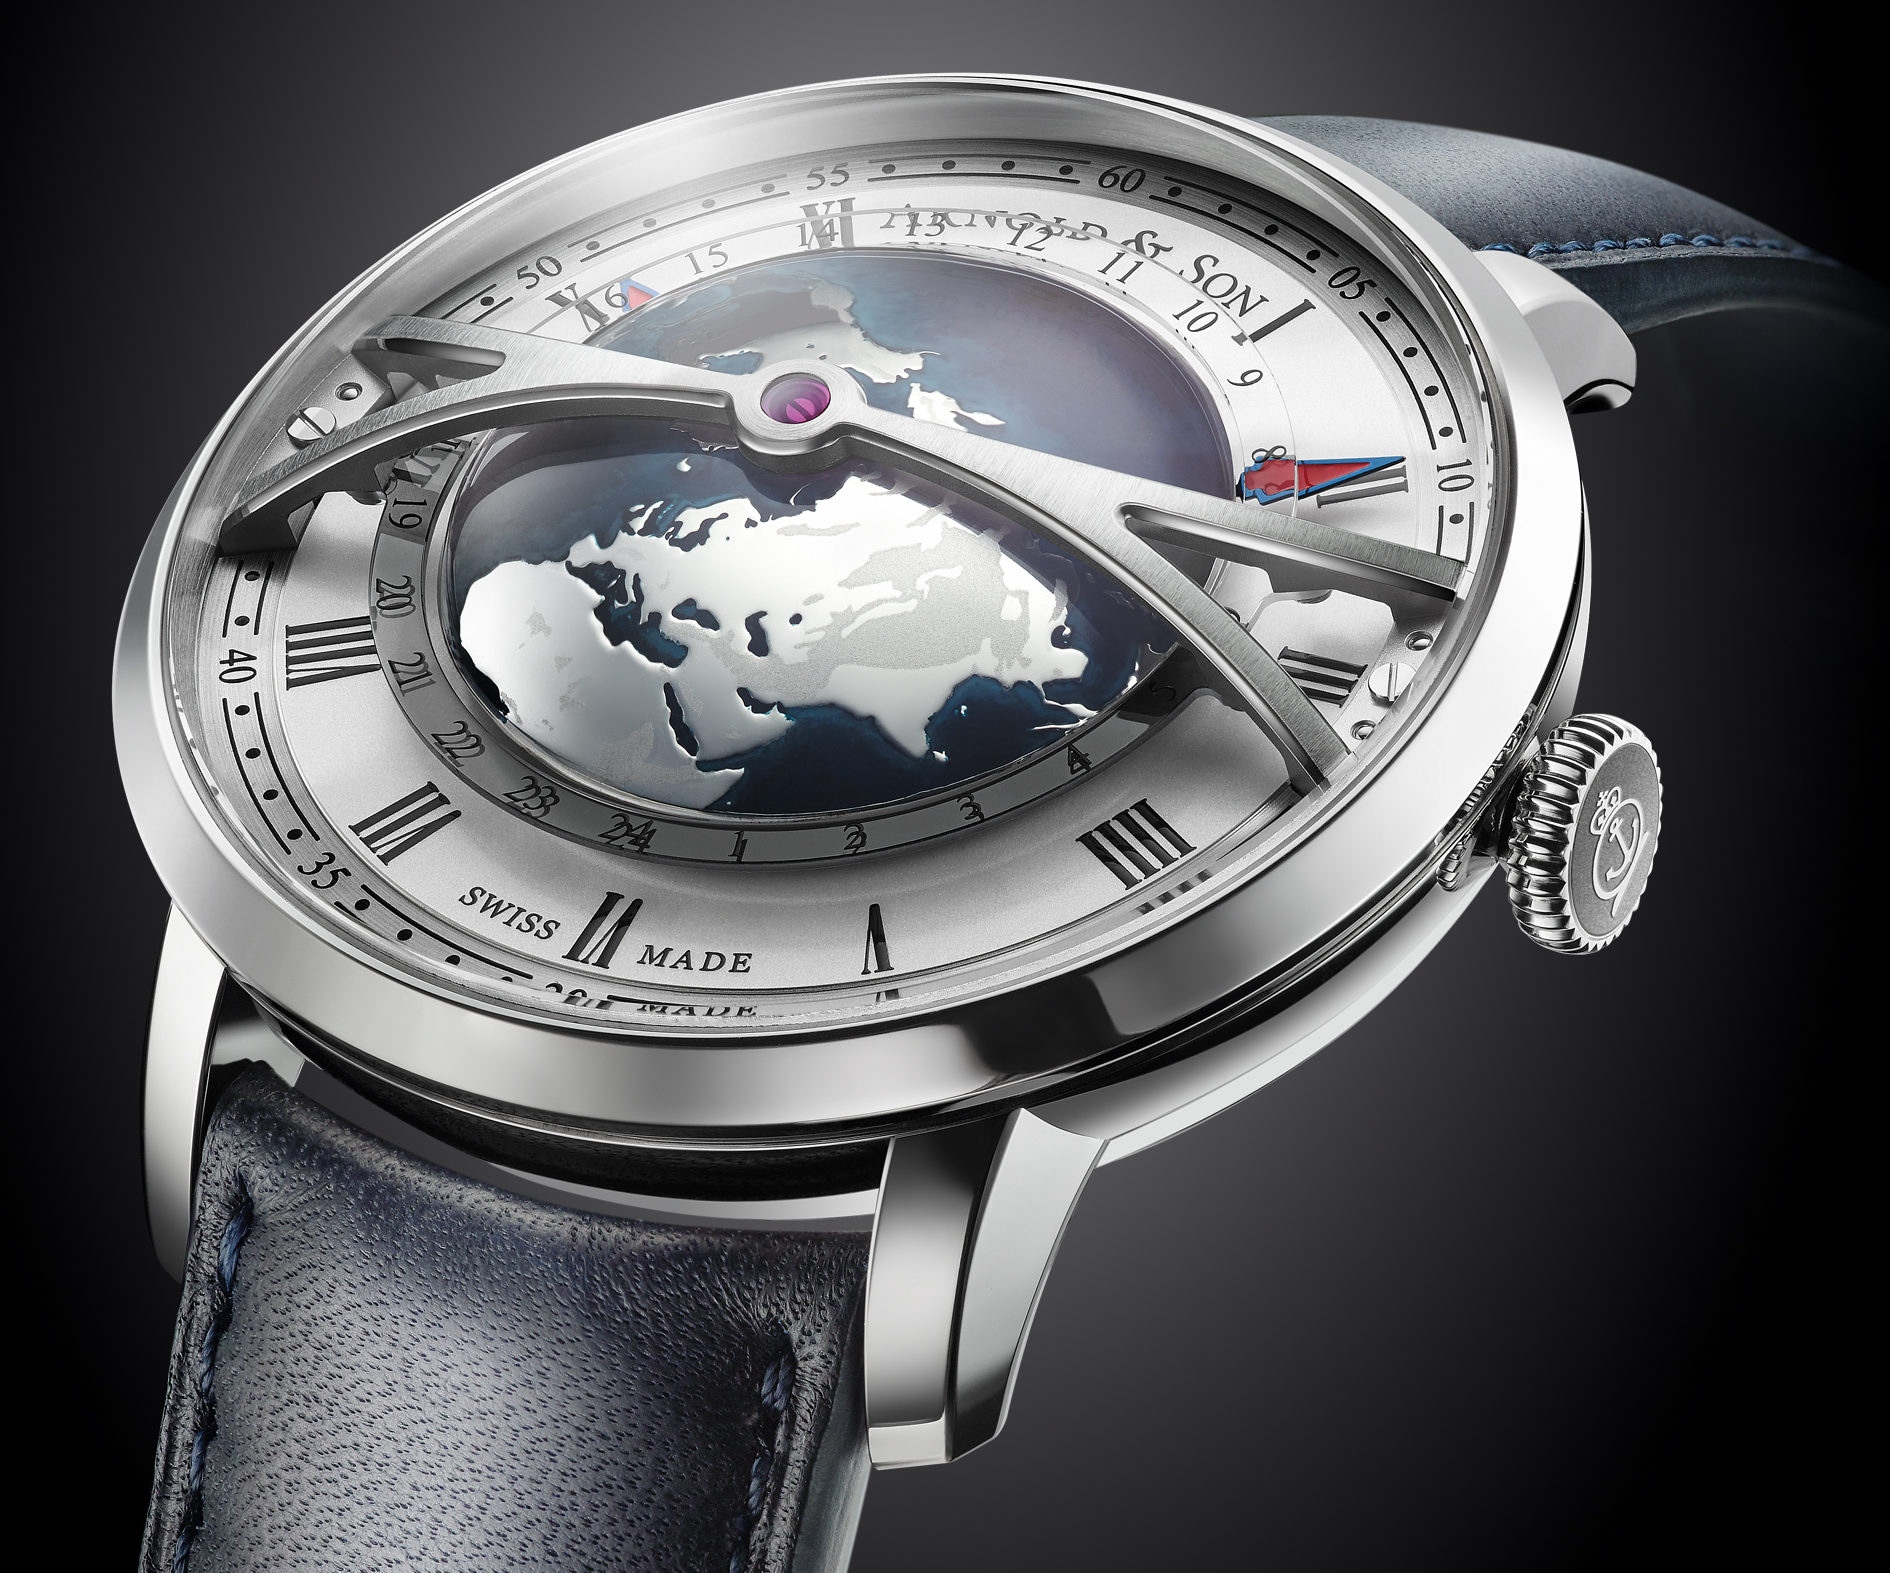 Arnold & Son reimagines the world-time complication in a magnificent, sculptural fashion with the Globetrotter.